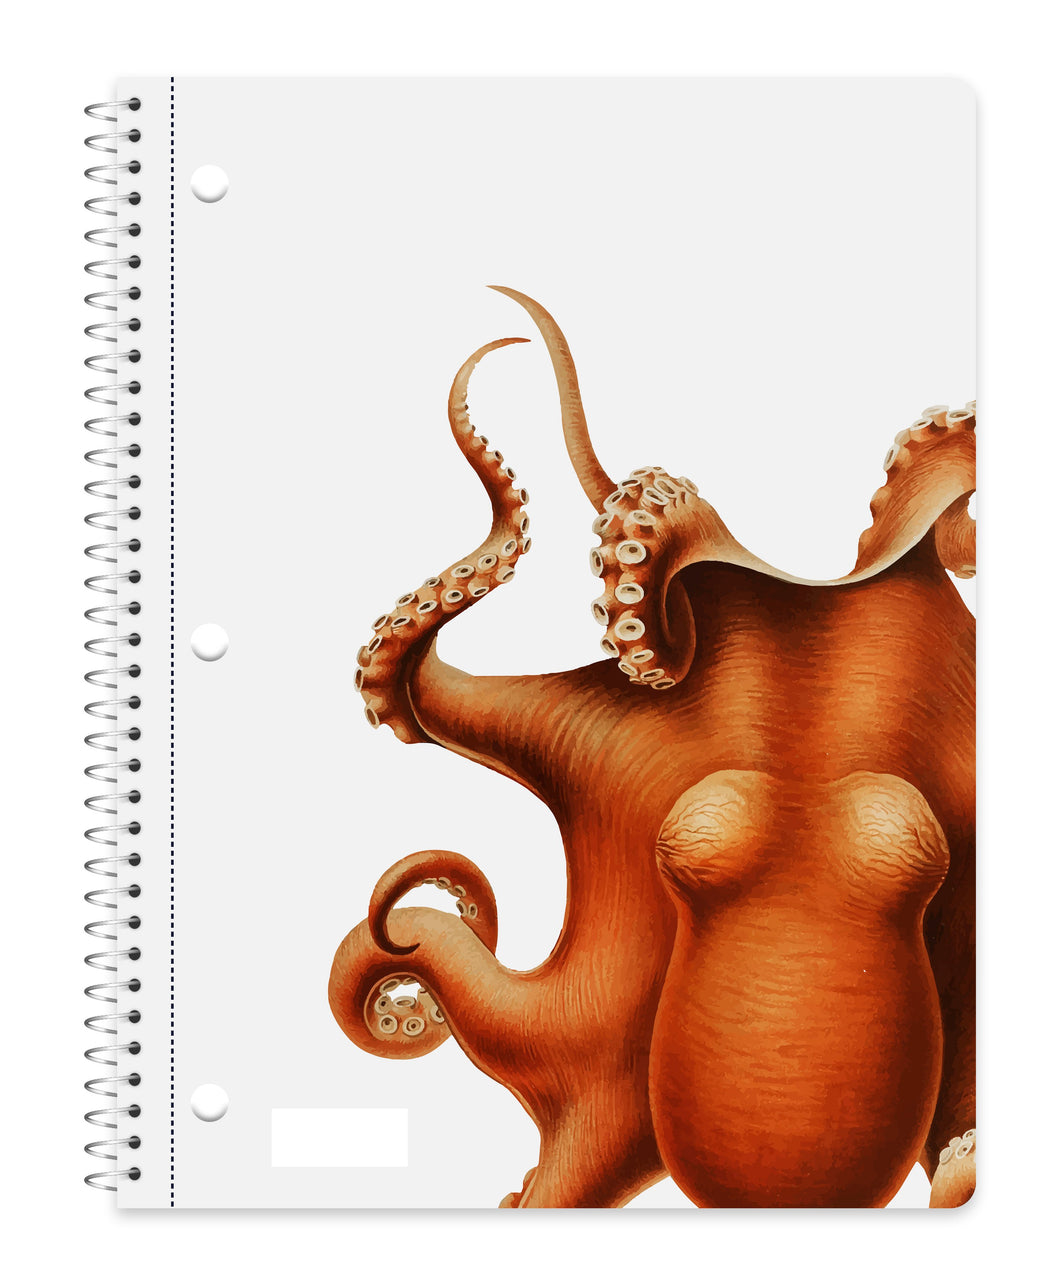 70 Sheets 10-1/2 x 8 Inch, Fashion Design Cover 1-Subject Spiral Notebook